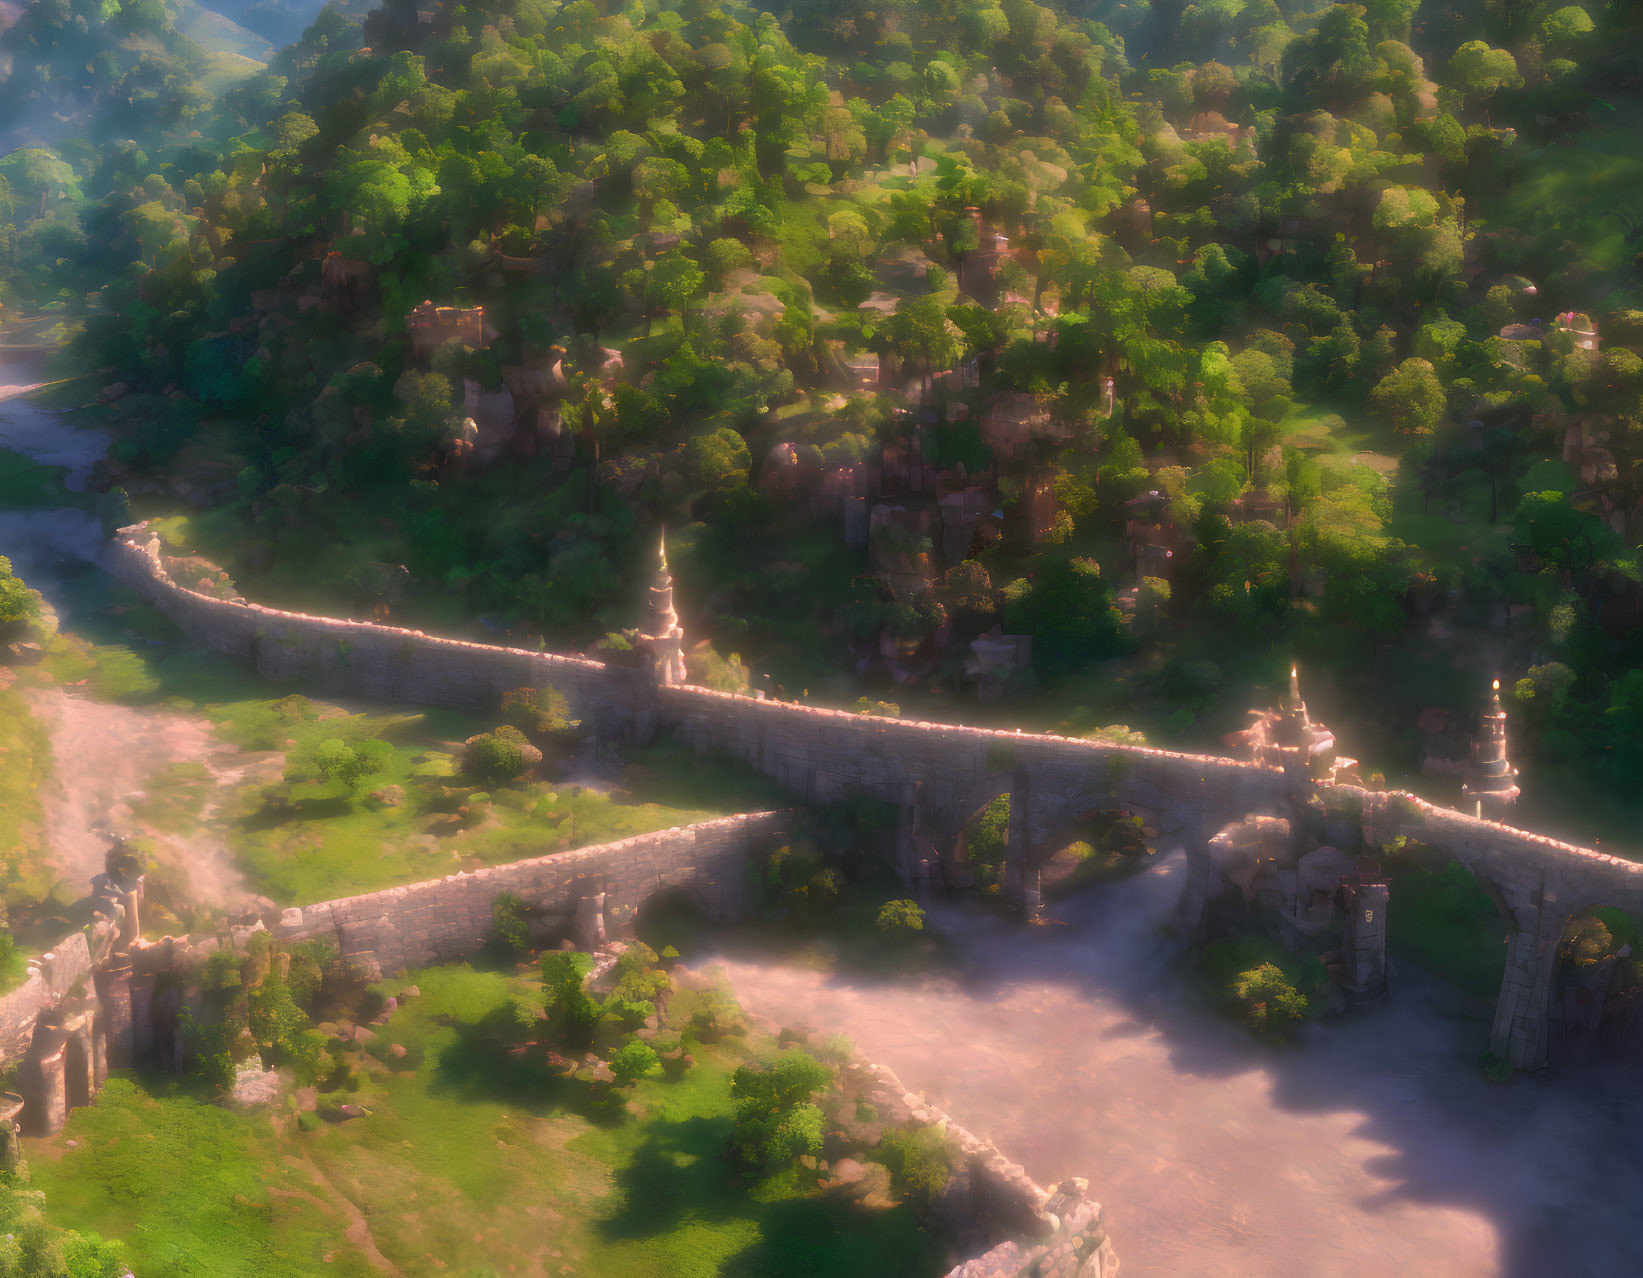 Sunlit fantasy landscape with lush forest, ancient stone wall, and towers hinting at lost civilization.